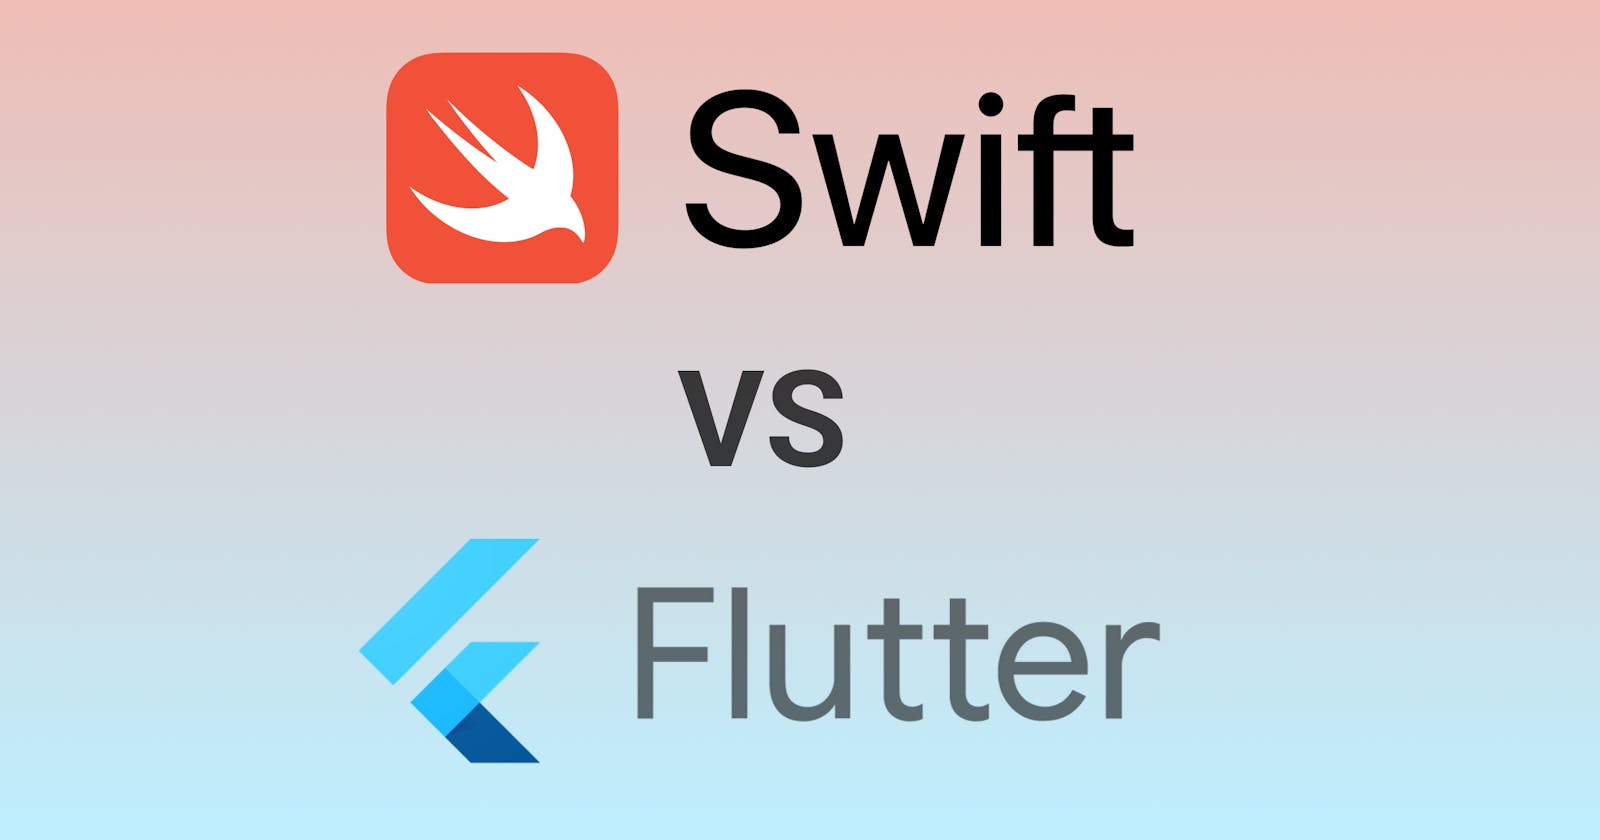 Native iOS with Swift vs. Flutter from iOS developer perspective